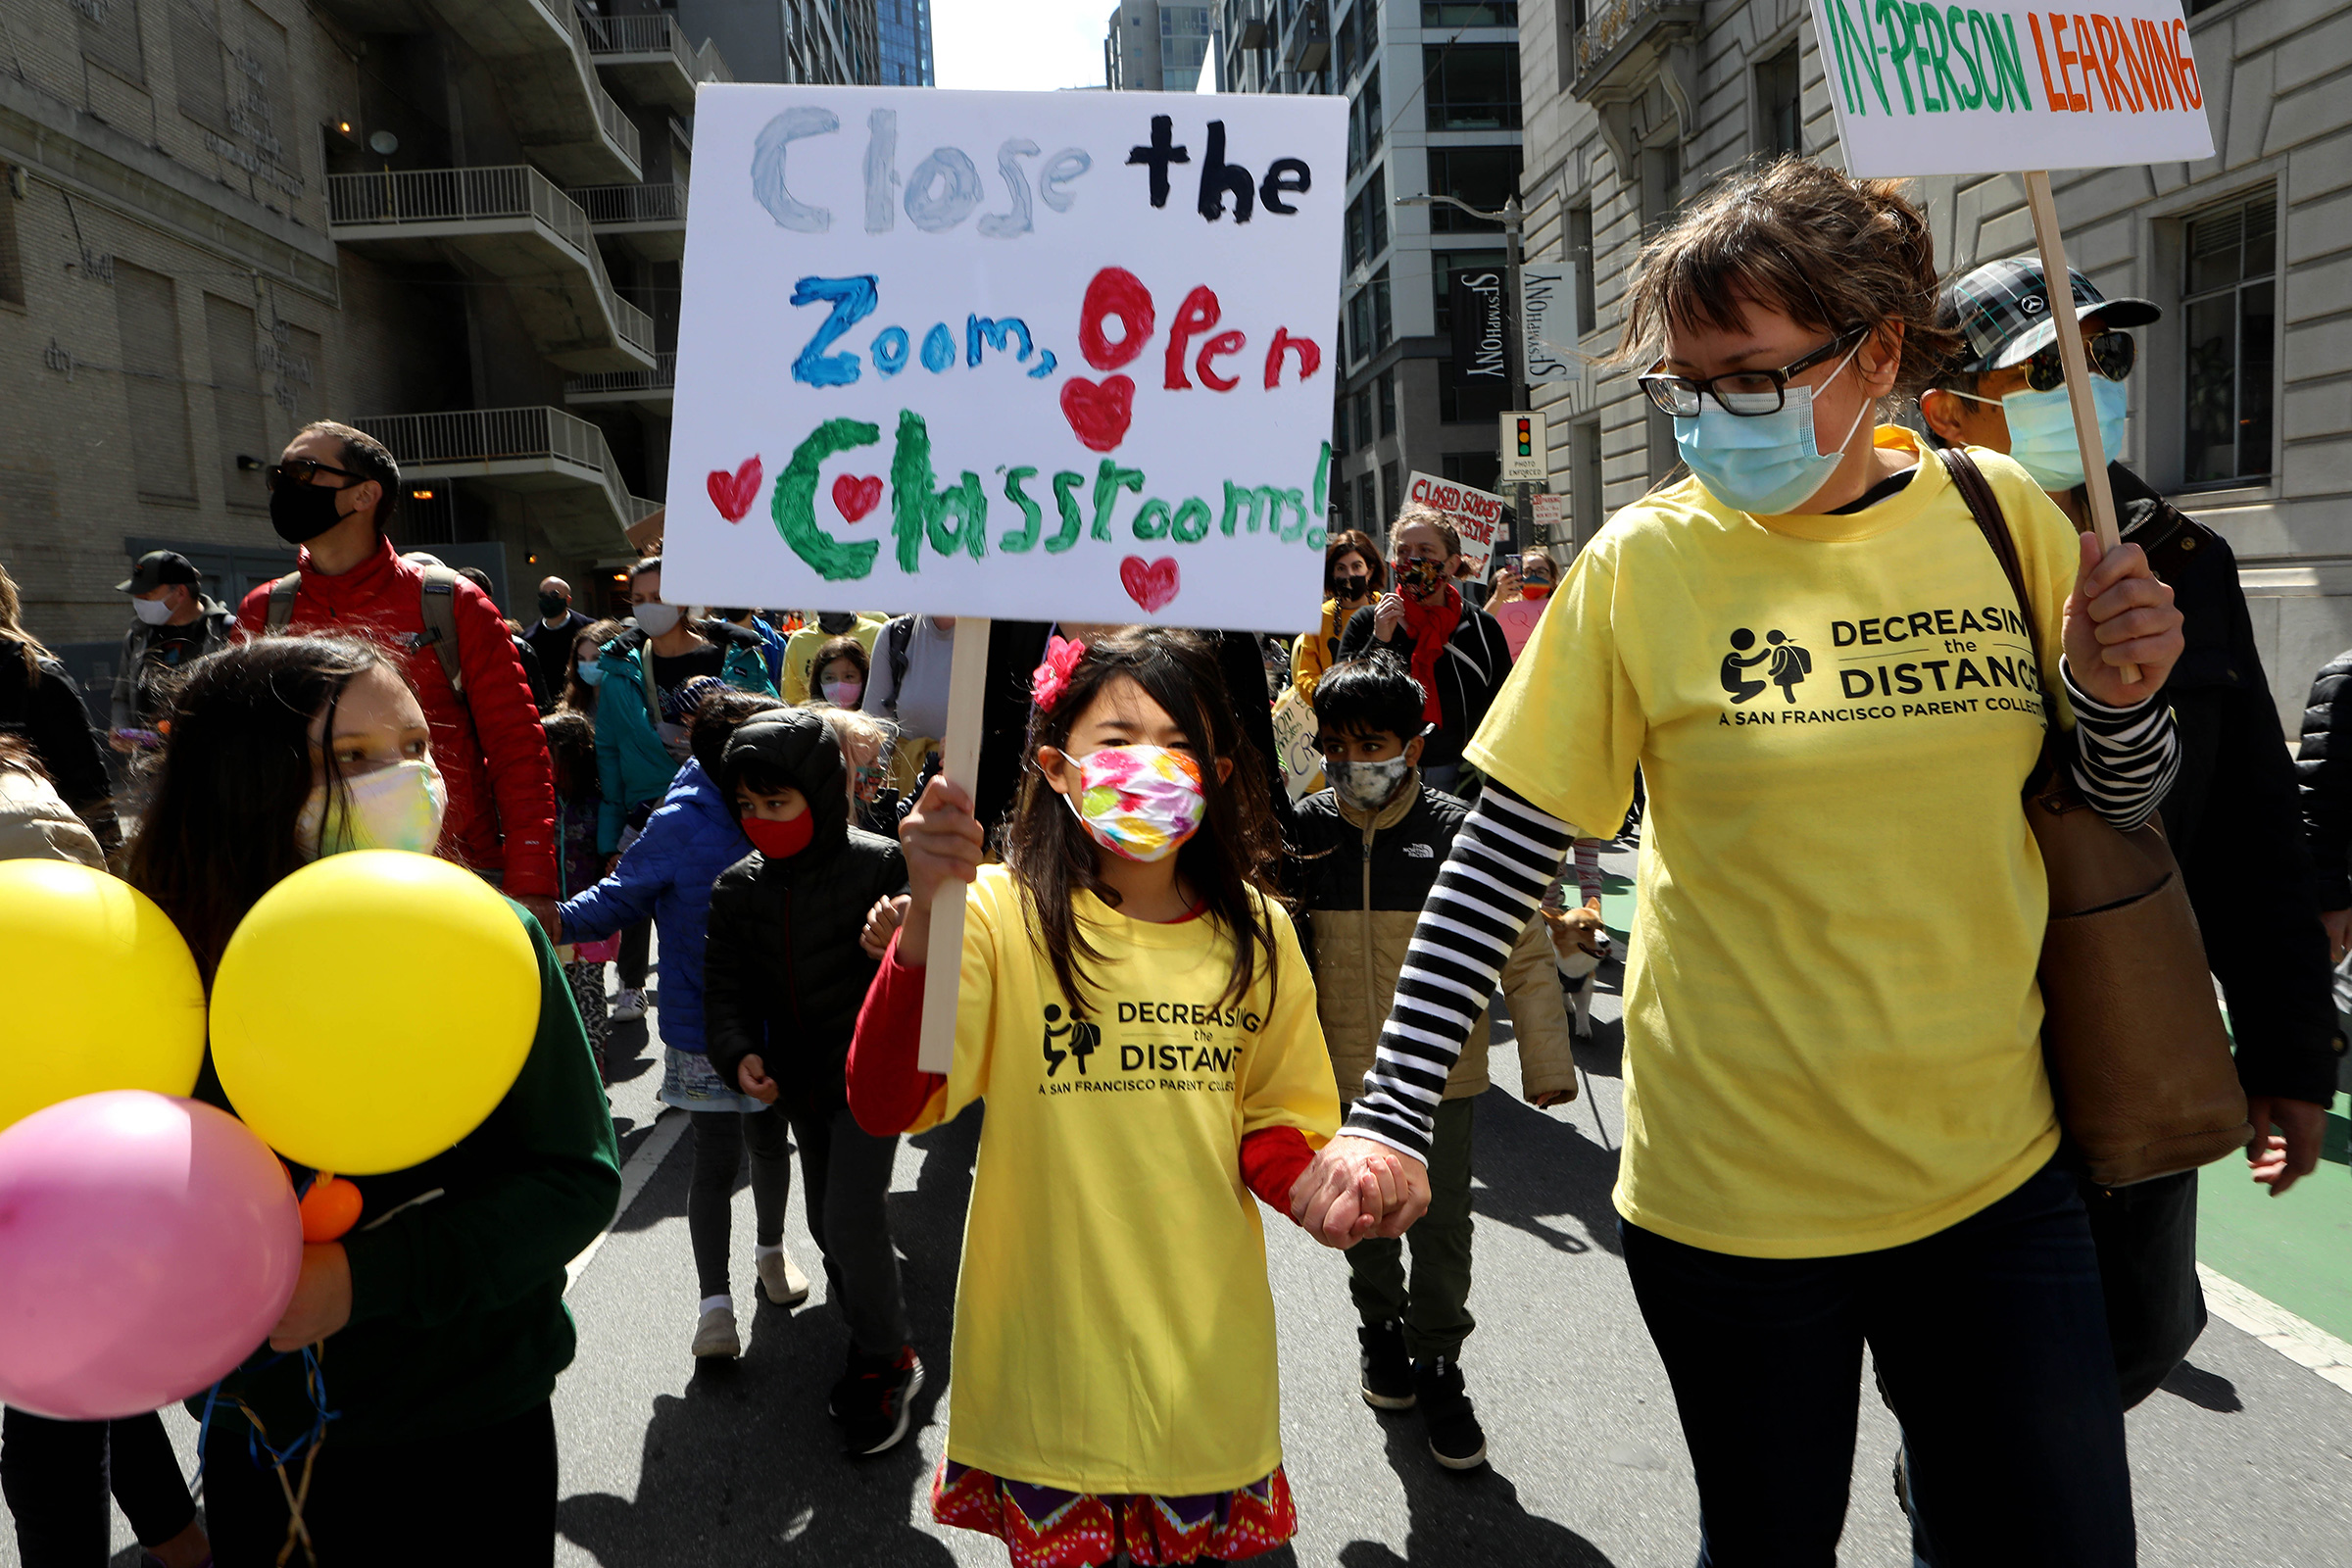 Kristina Leng, 9, marches to the Civic Center with her mother Monika Leng, and father Rodney Leng during the Families Rally to Demand Schools Fully Reopen event in San Francisco, on March 13, 2021.dent, marches to the Civic Center as she holds hands with her mother Monika Leng, and father Rodney Leng during the Families Rally to Demand Schools Fully Reopen event in San Francisco, on March 13, 2021.